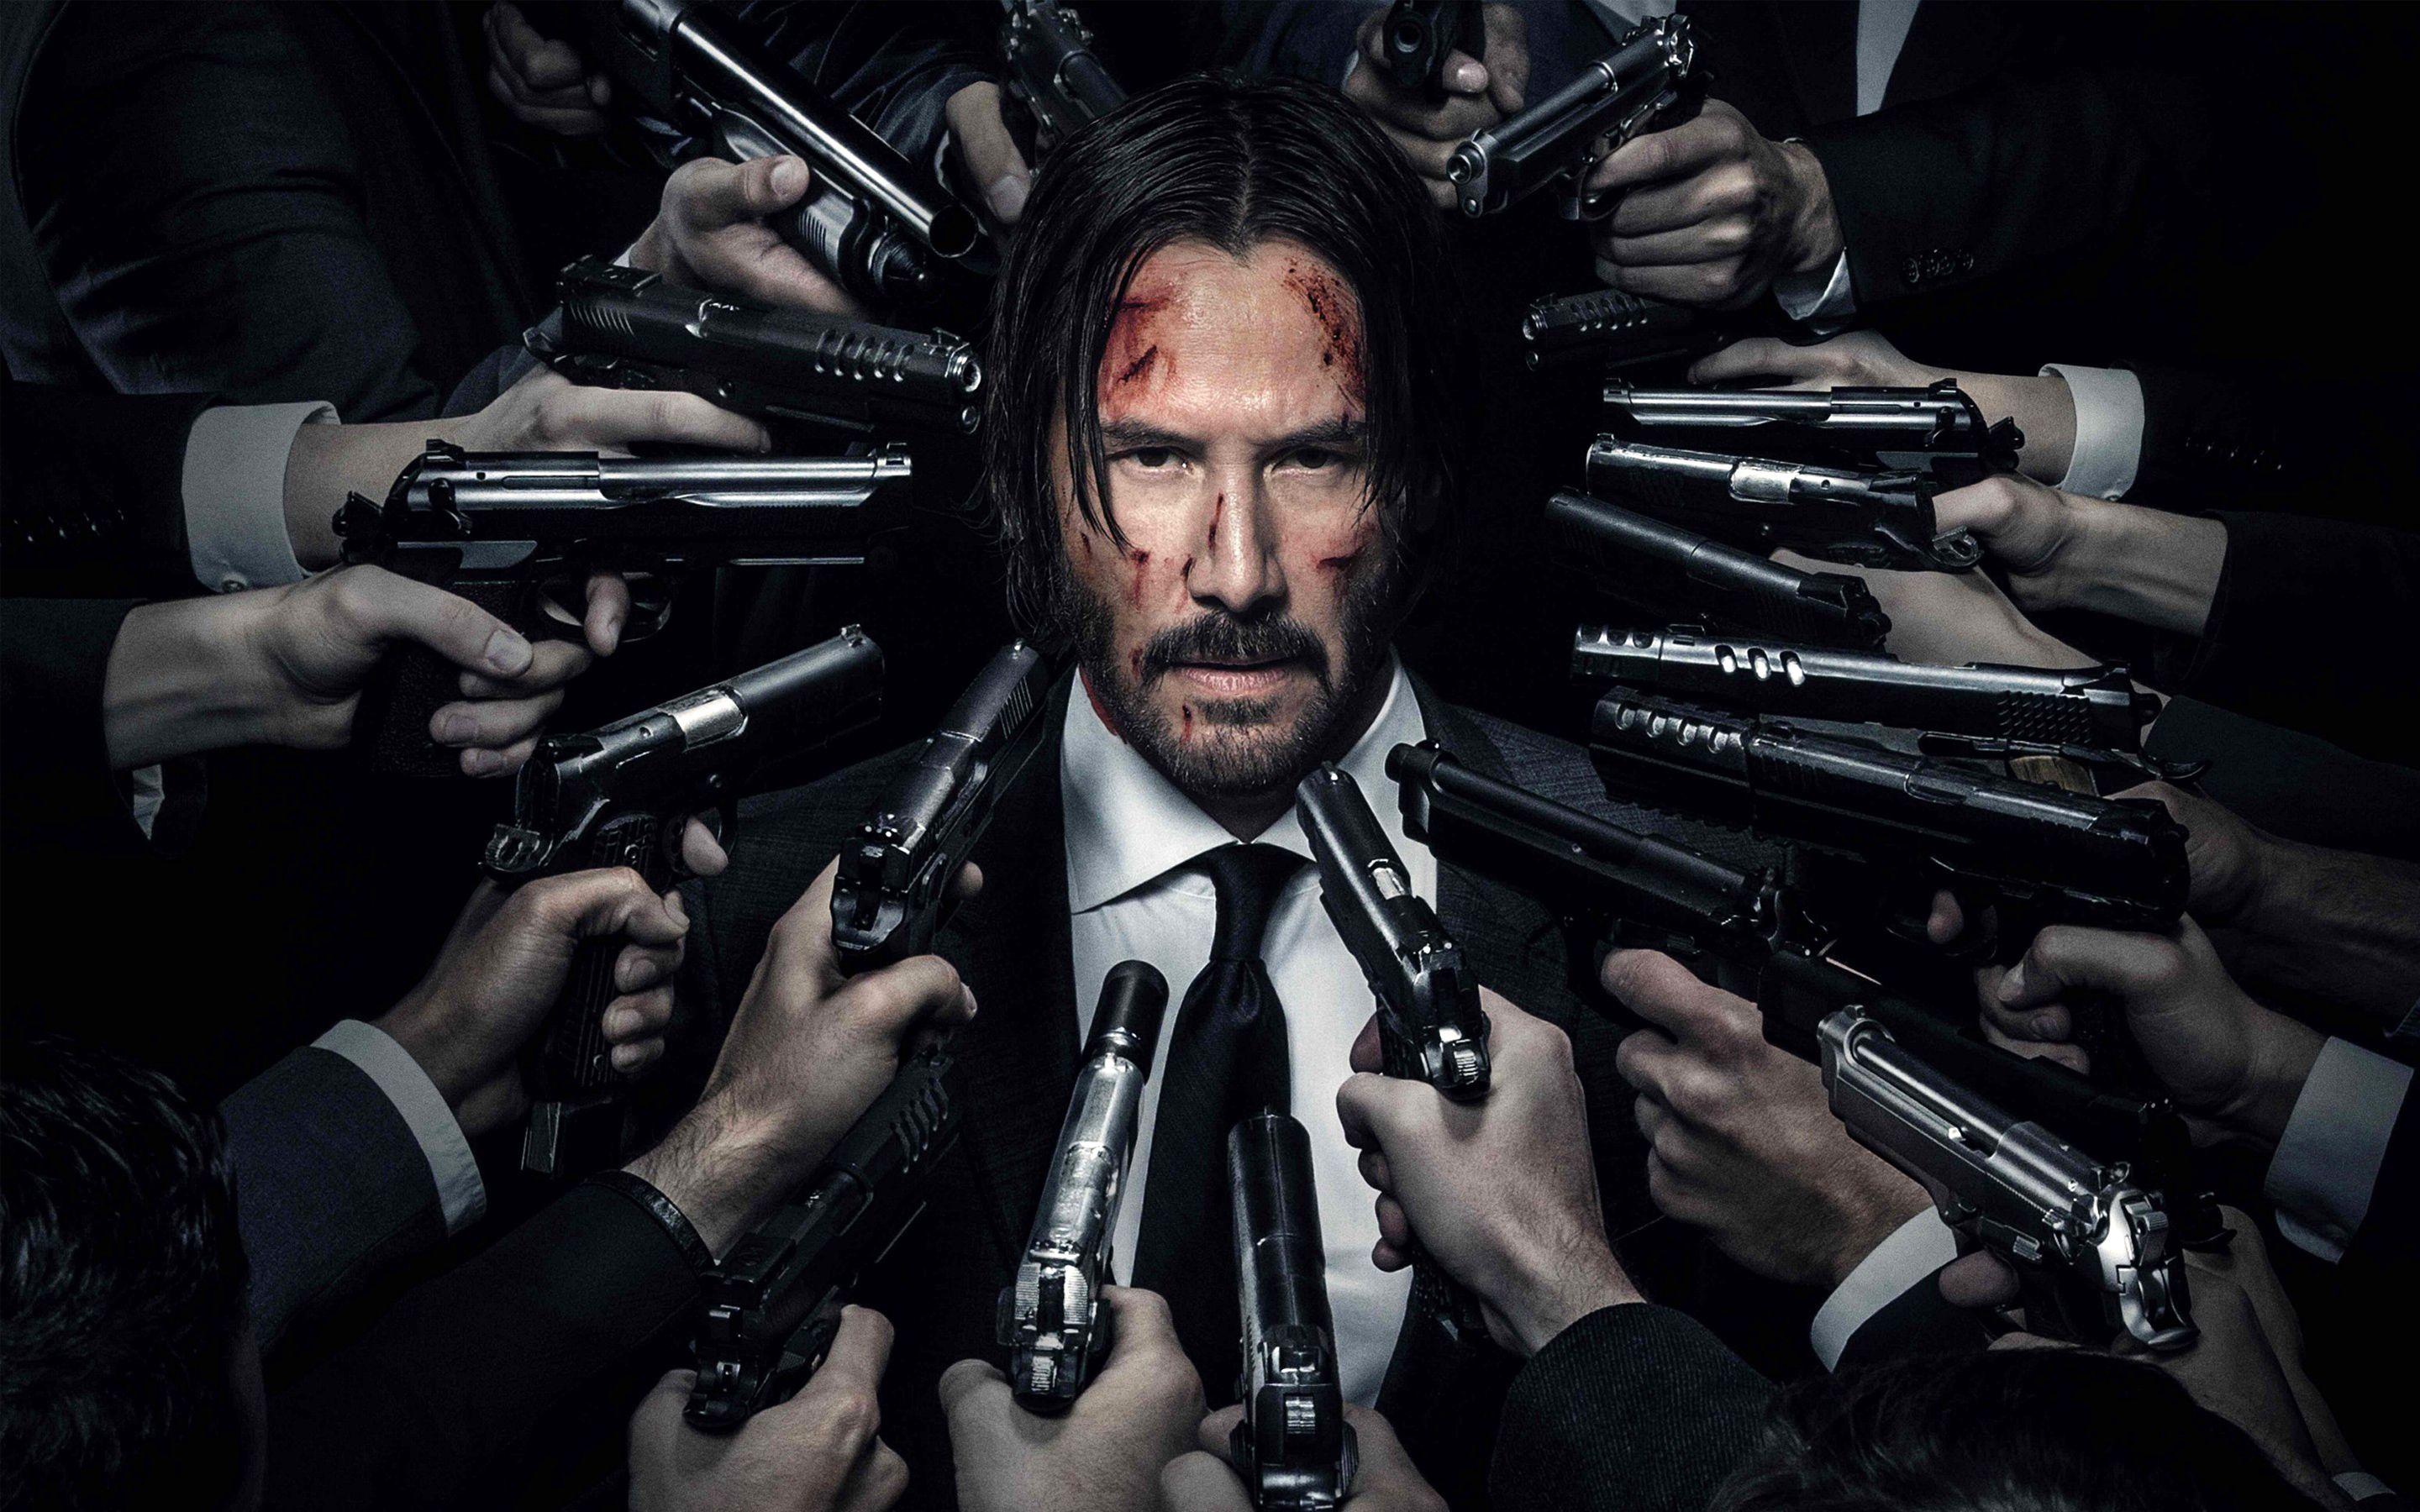 2. John Wick in John Wick Frachise Another role absolutely perfect for Keanu. From Matrix, he got praise and applause, but from John Wick, he earned respect of the film industry and audiences alike.